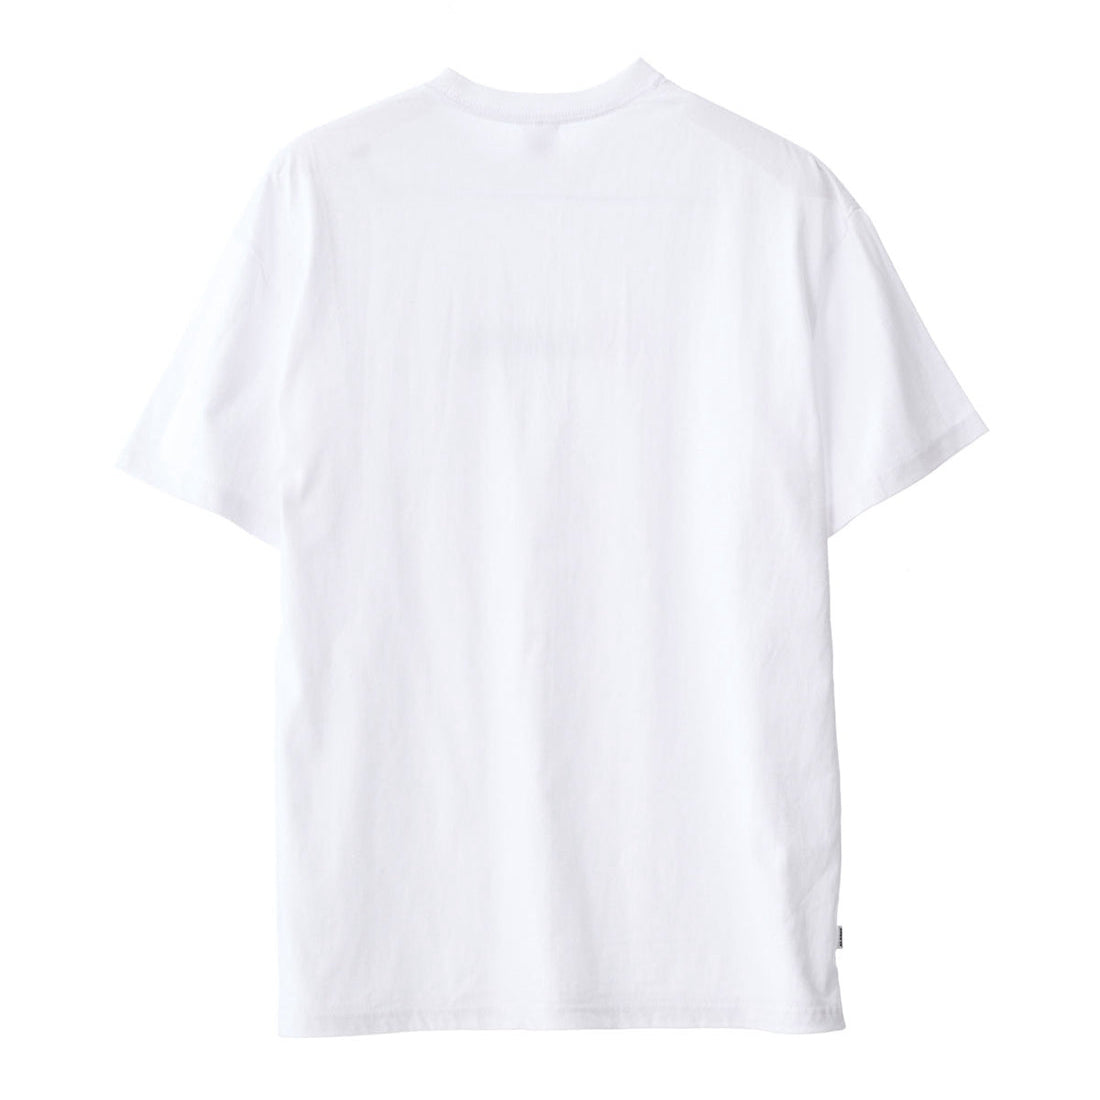 XLARGE - APPLES SS TEE - SOLID WHITE